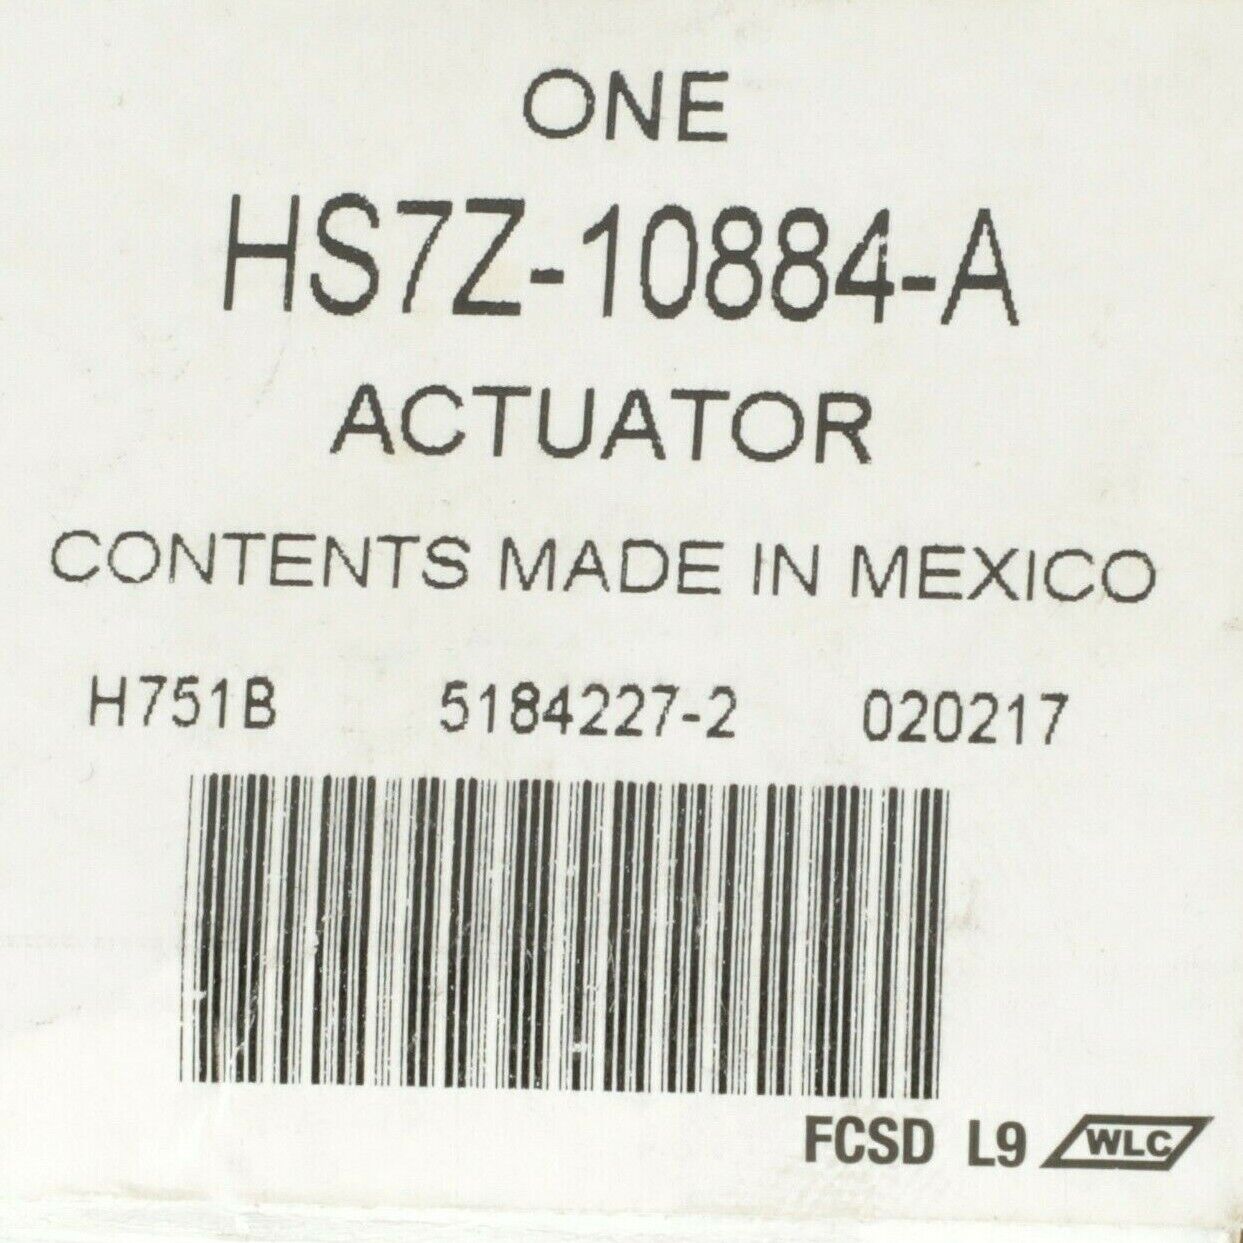 2017 Ford Fusion OEM Temperature Control Actuator Hs7z-10884-a for 